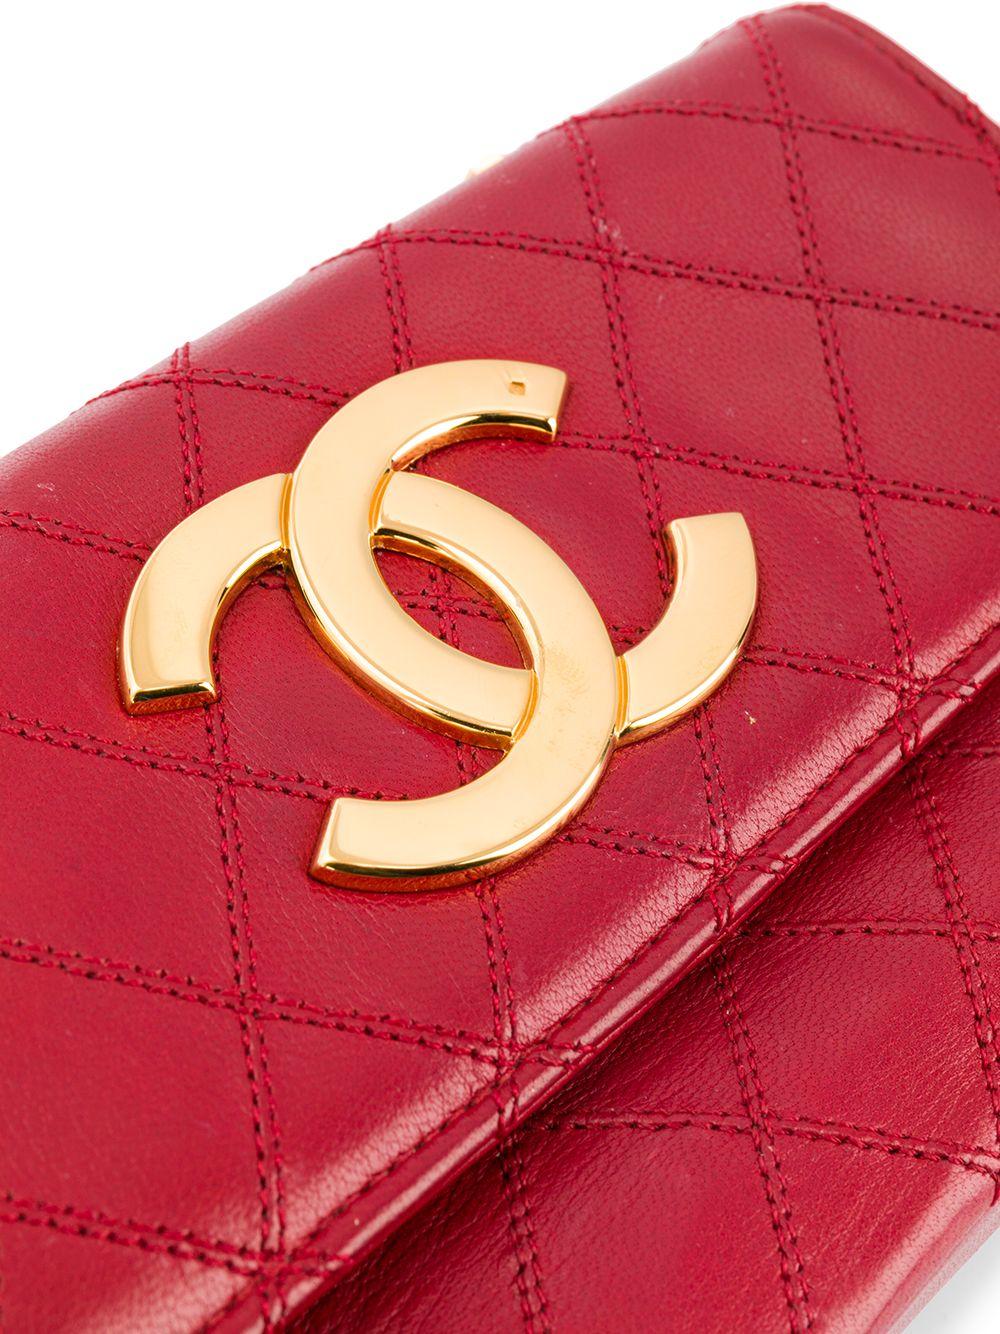 Crafted in France from an intricately luxurious combination of soft calfskin leather and yellow-gold tone metal, this timeless pre-loved Chanel shoulder bag features a vibrant red exterior, a diamond quilted finish, and a leather laced chain